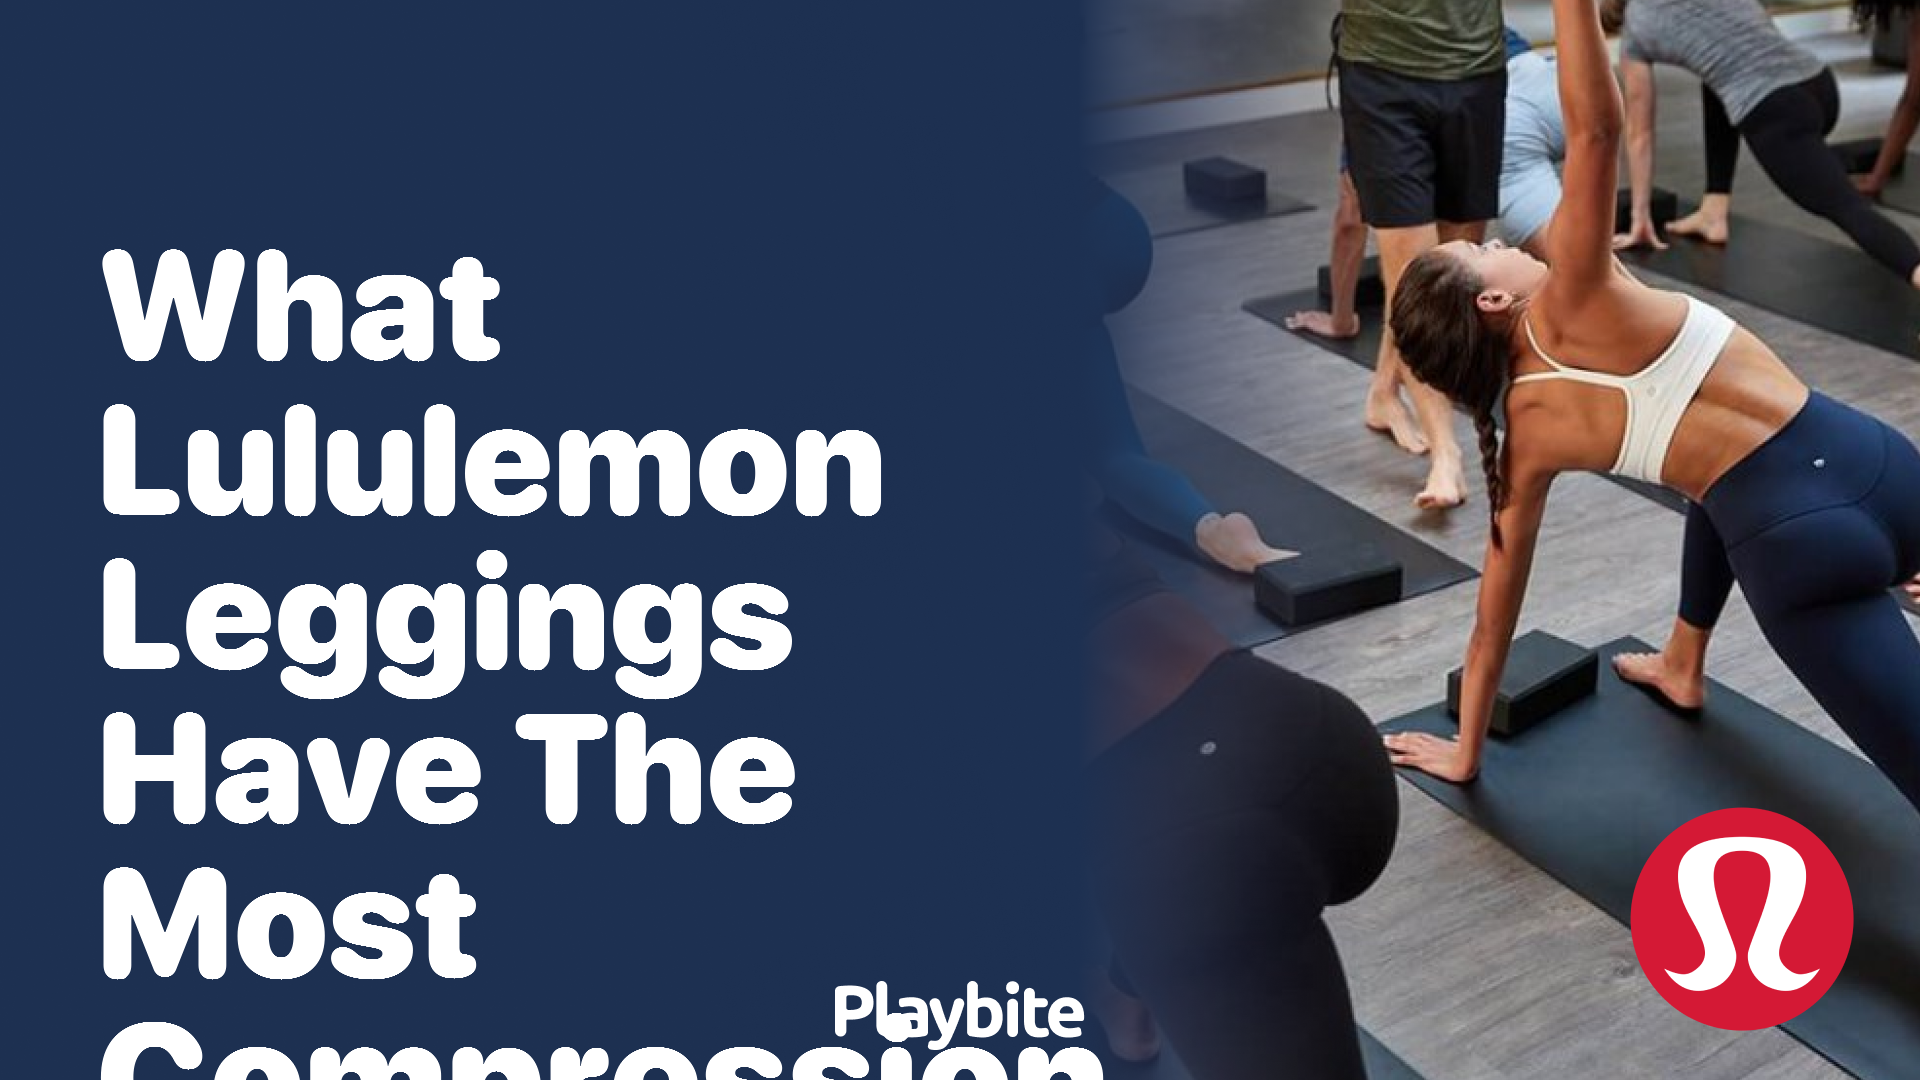 https://www.playbite.com/wp-content/uploads/sites/3/2024/03/what-lululemon-leggings-have-the-most-compression.png